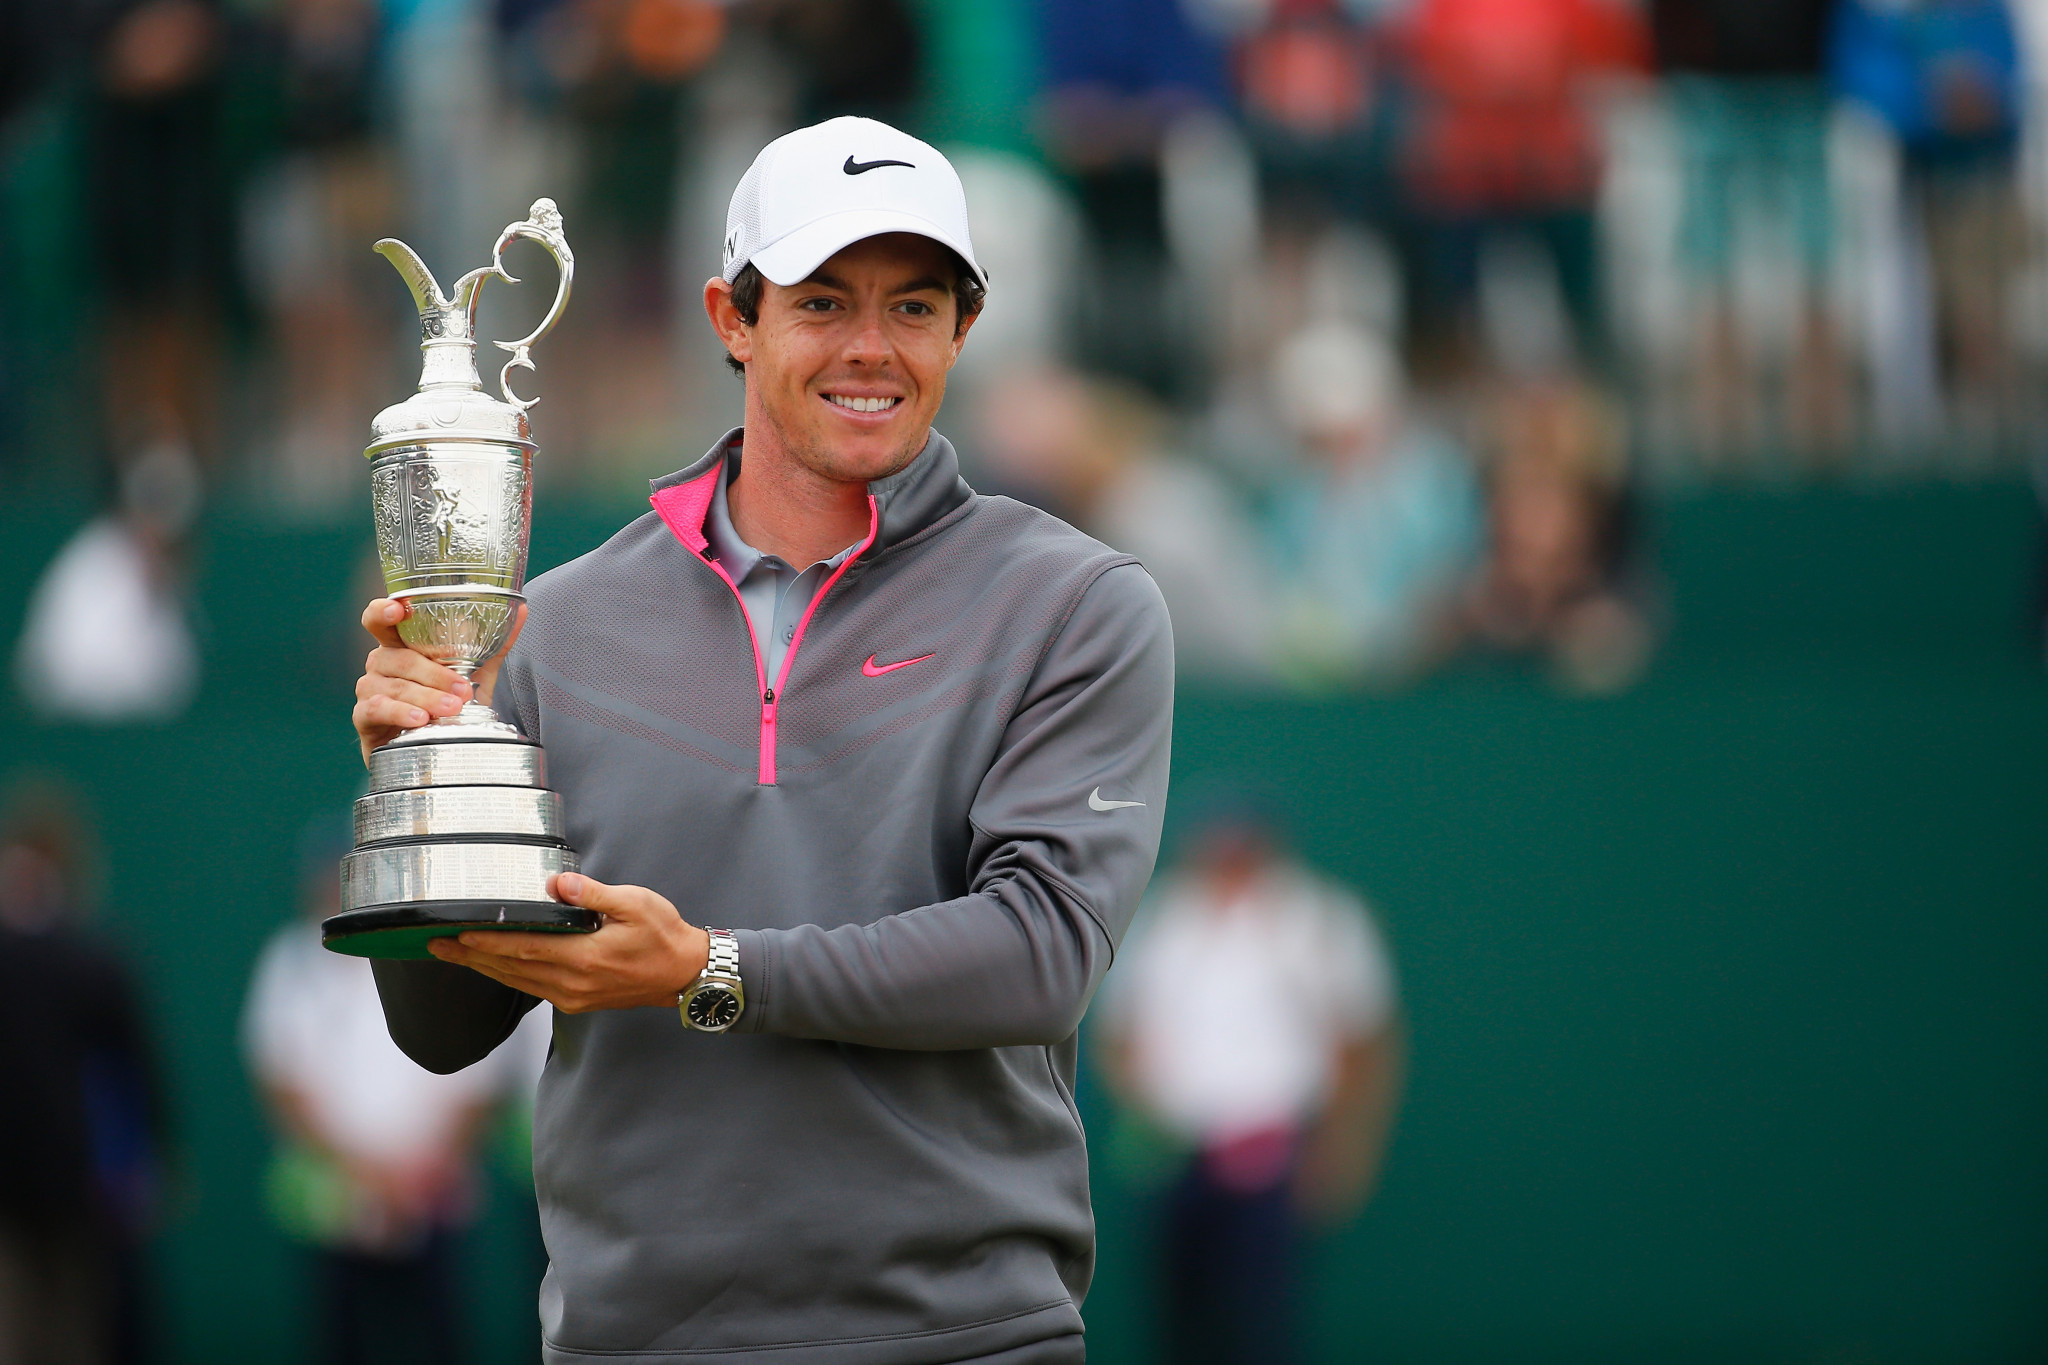 Rory McIlroy lifted the Claret Jug last time The Open was held at Royal Liverpool ©Getty Images